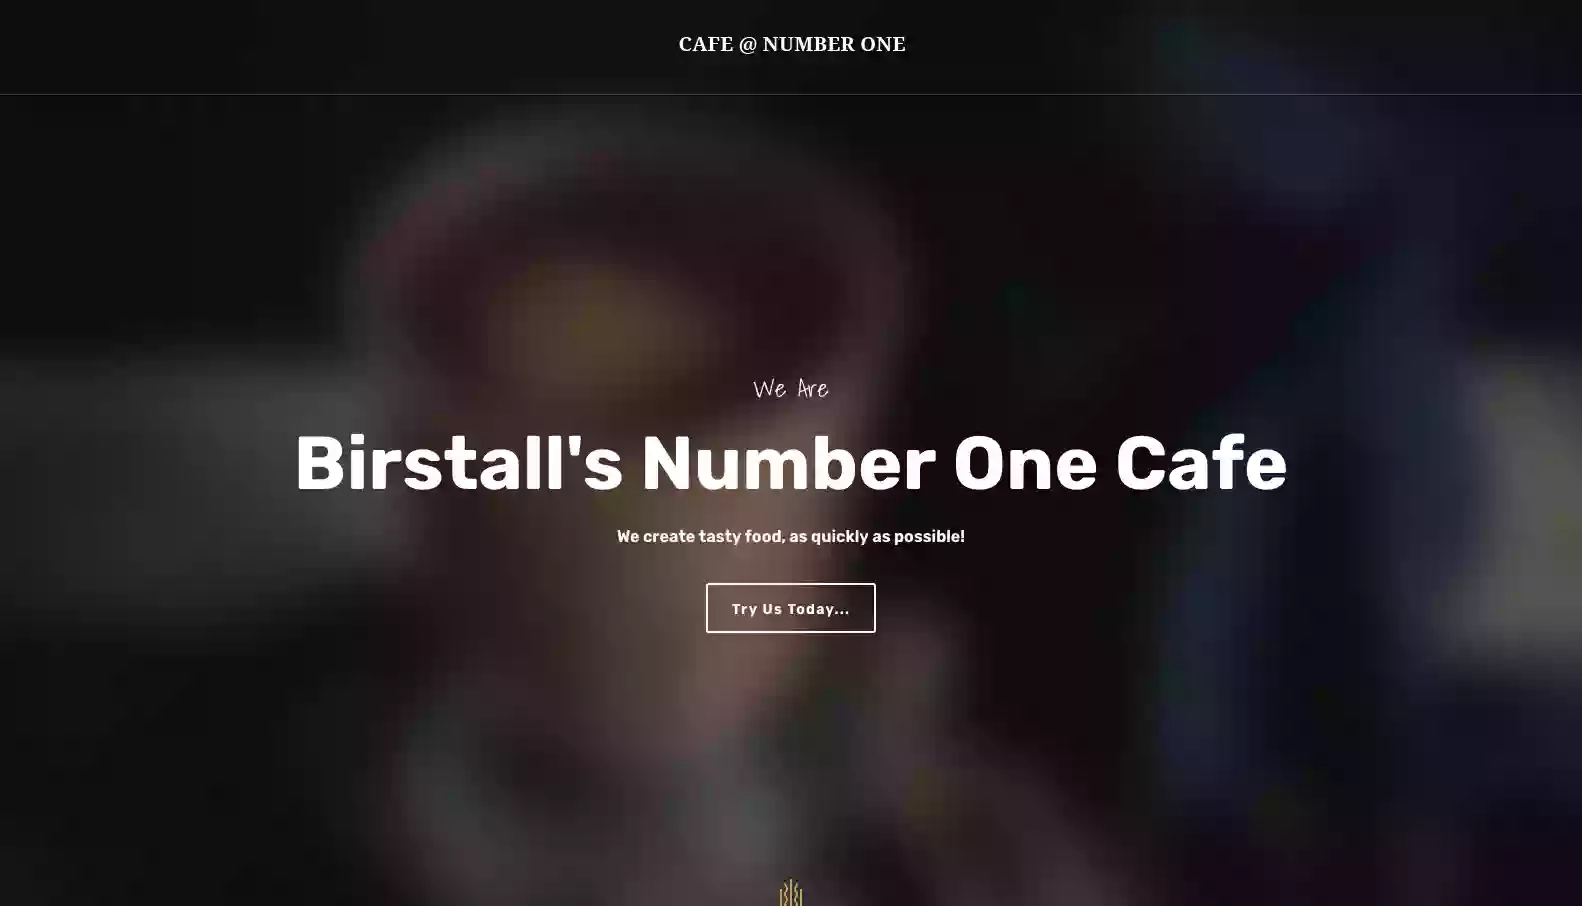 Cafe at Number One